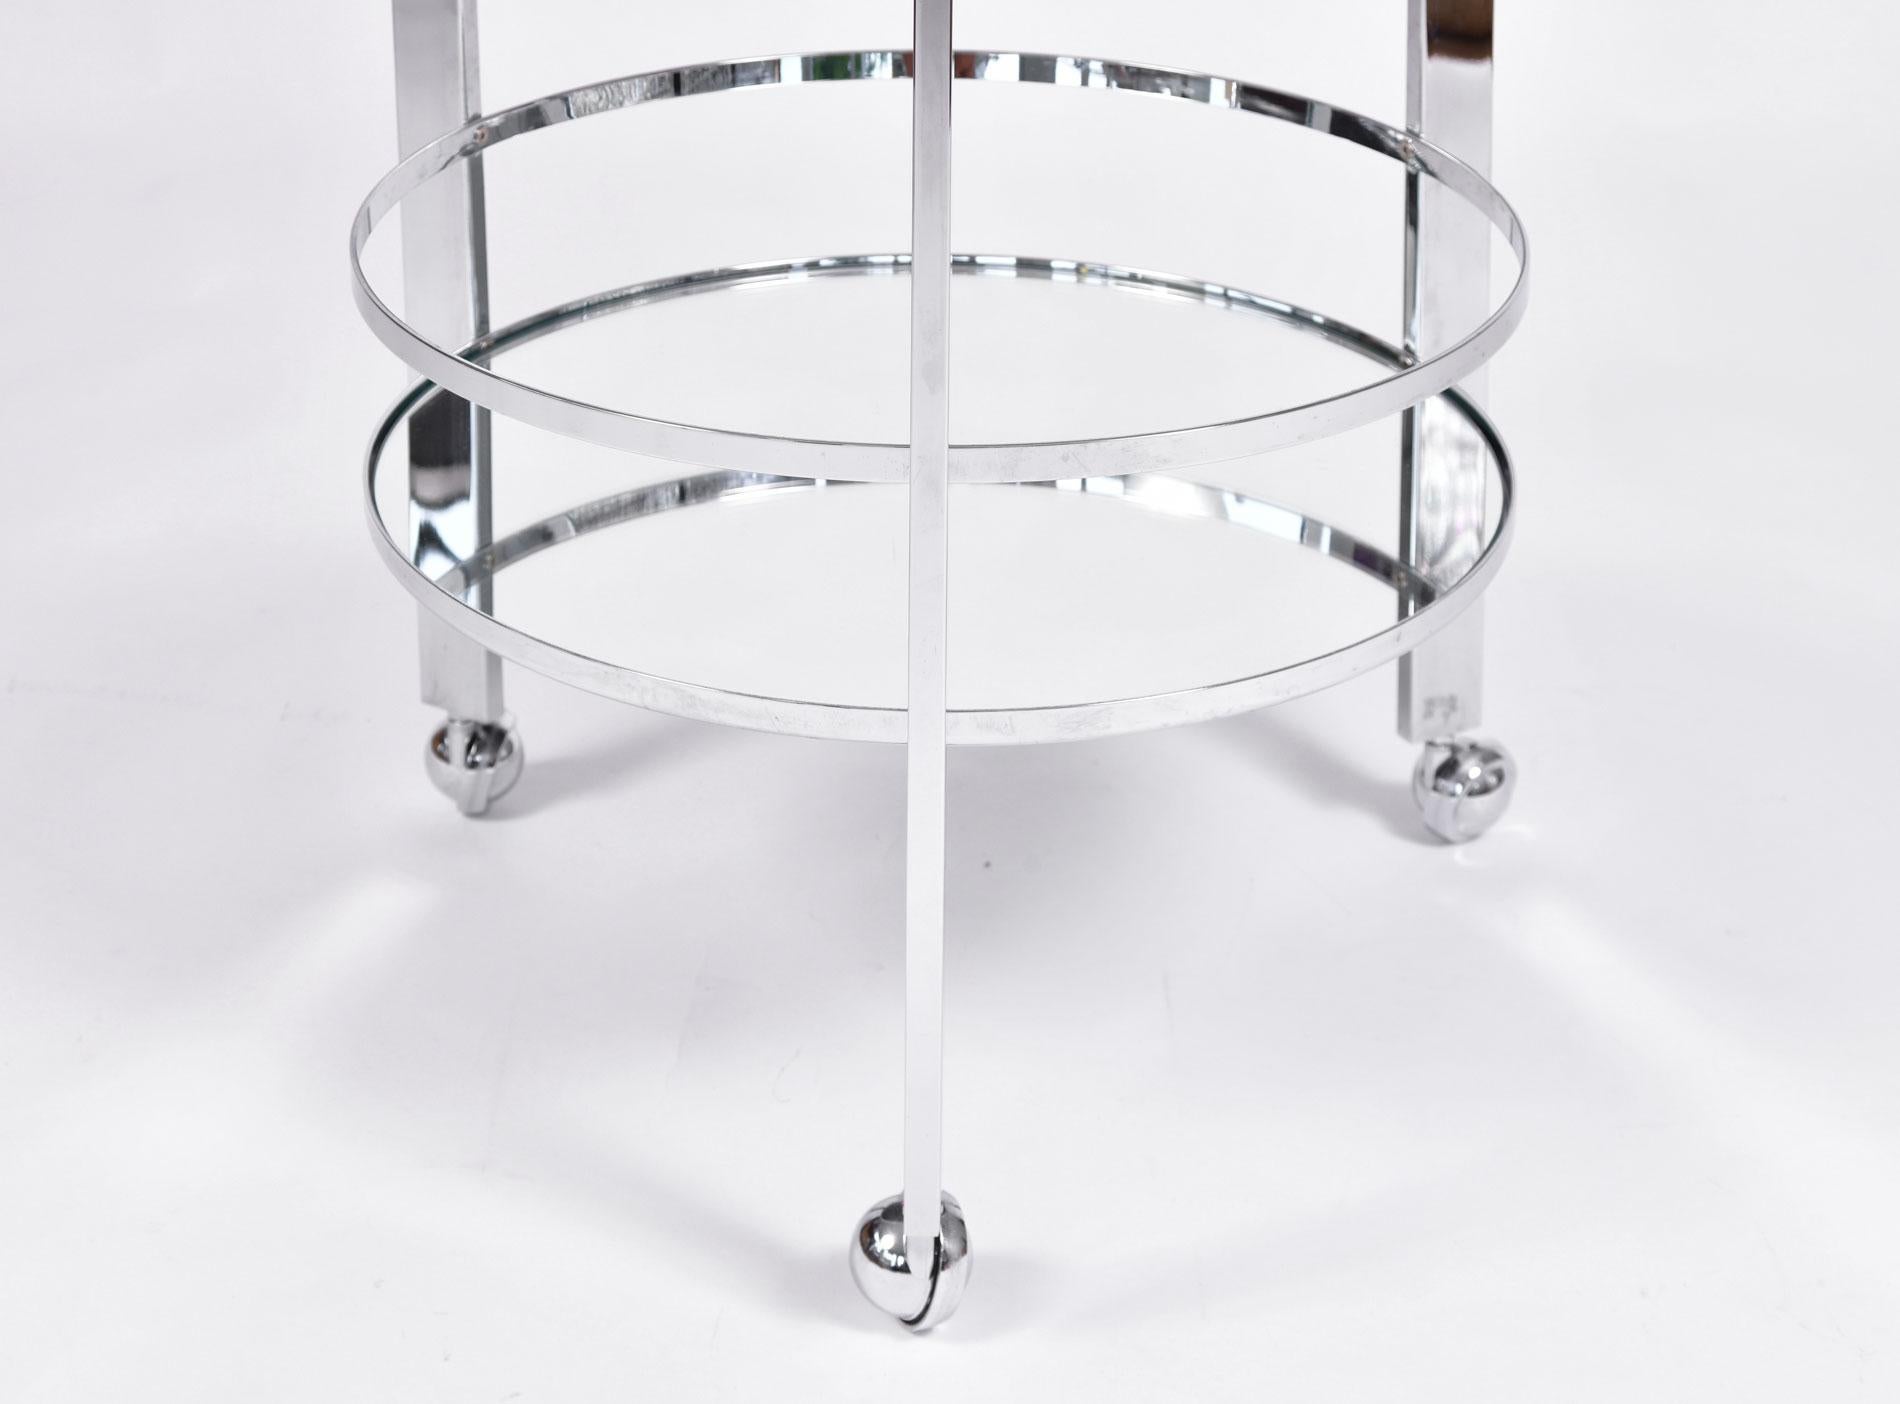 Two-tiered chrome circular drinks trolley/serving cart with chic modern frame. Mirrored glass bottom shelf adds beautiful reflection. Chrome covered caster wheels for smooth movement.
  